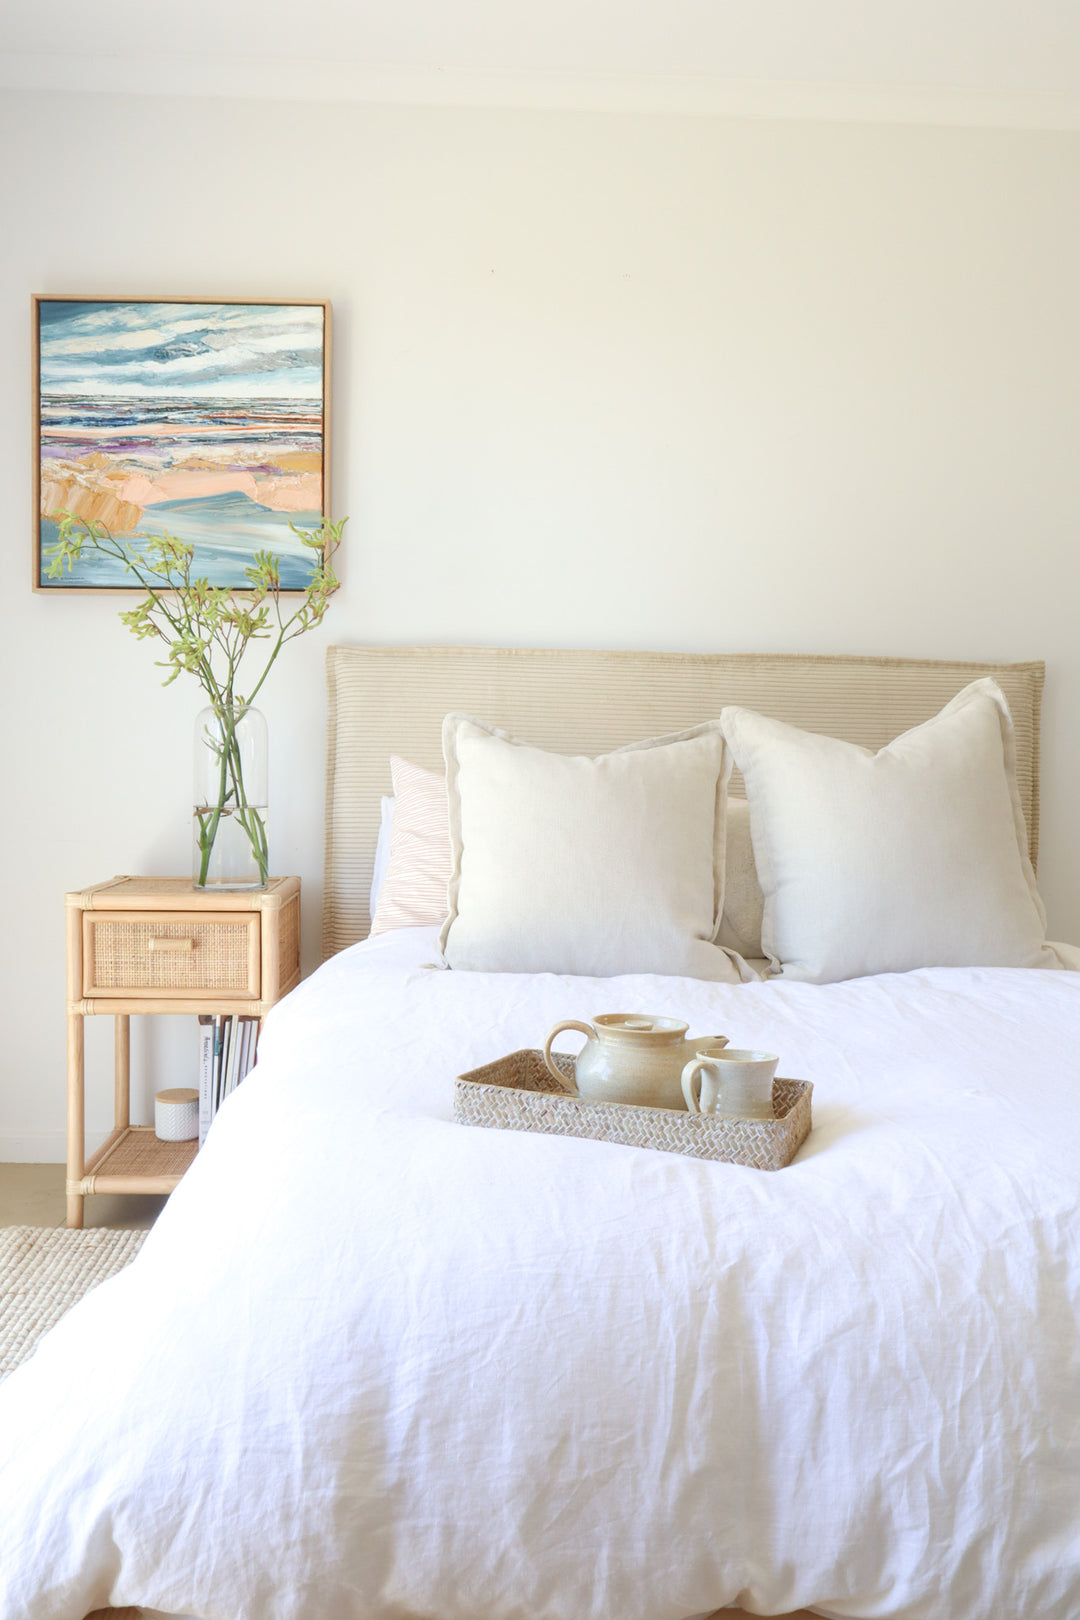 5 Quick Tips for Styling your Bedroom